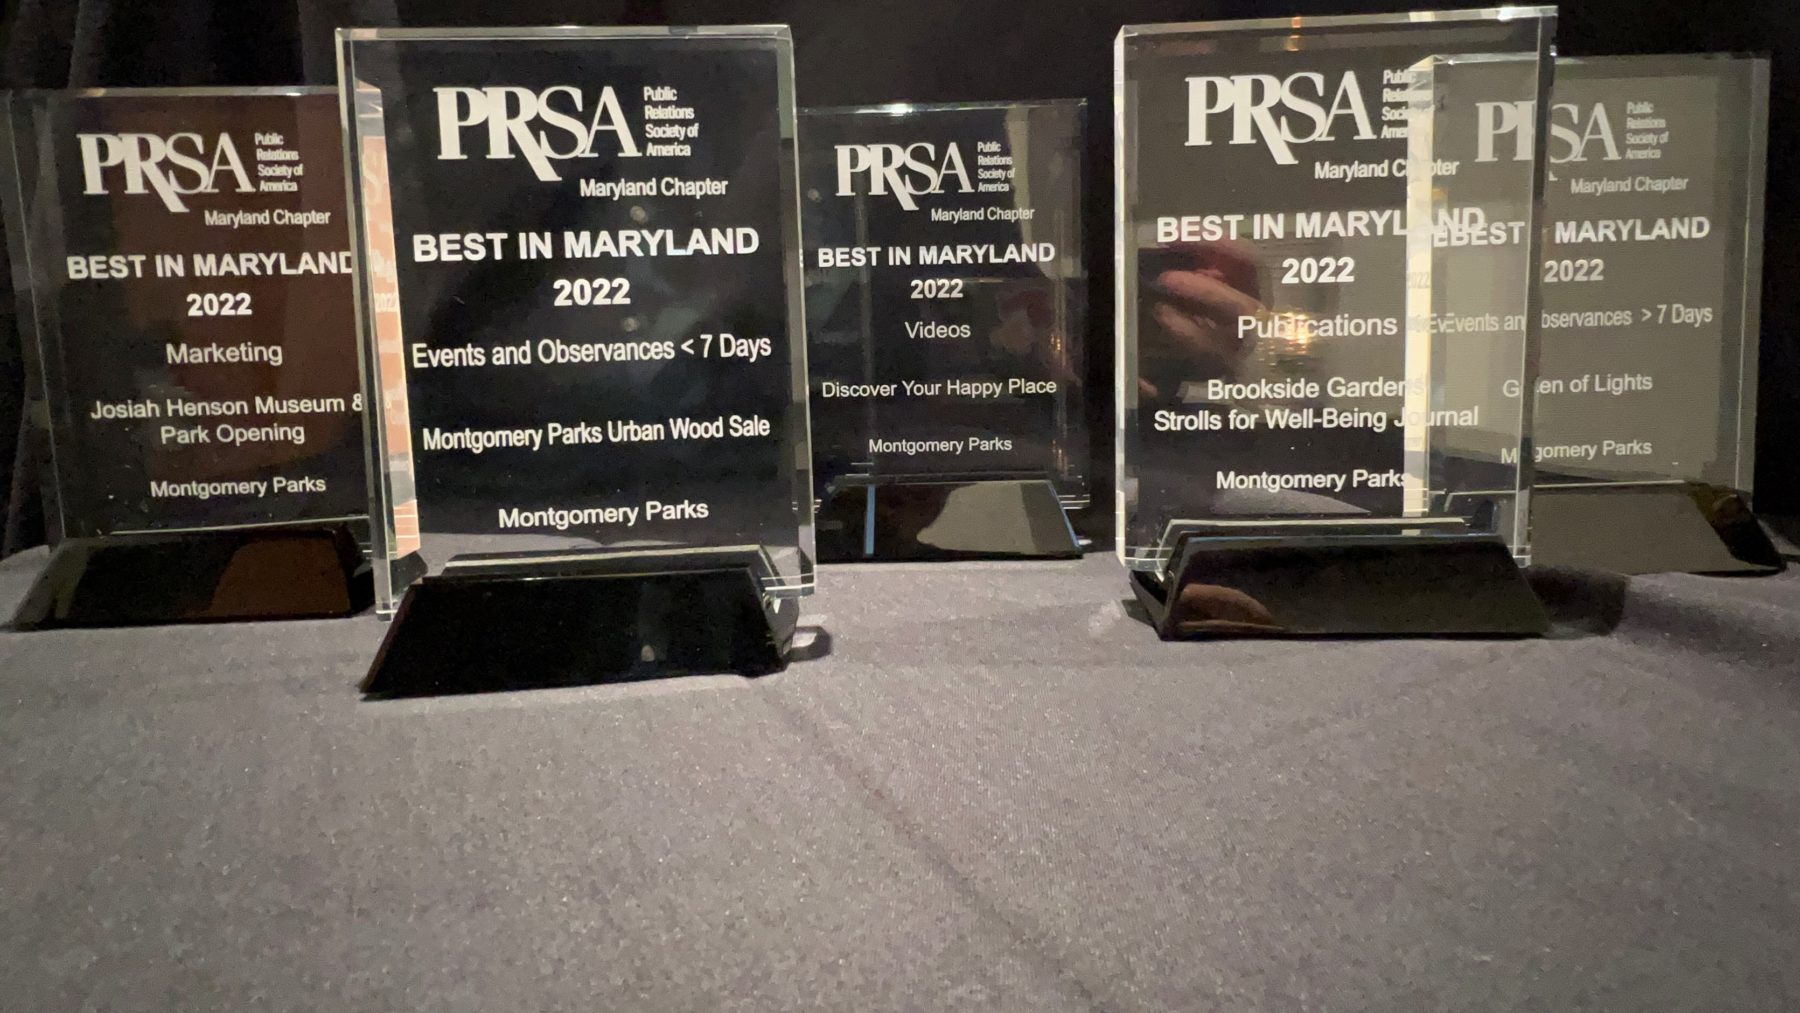 Five PRSA Maryland Chapter "Best in Maryland" awards.